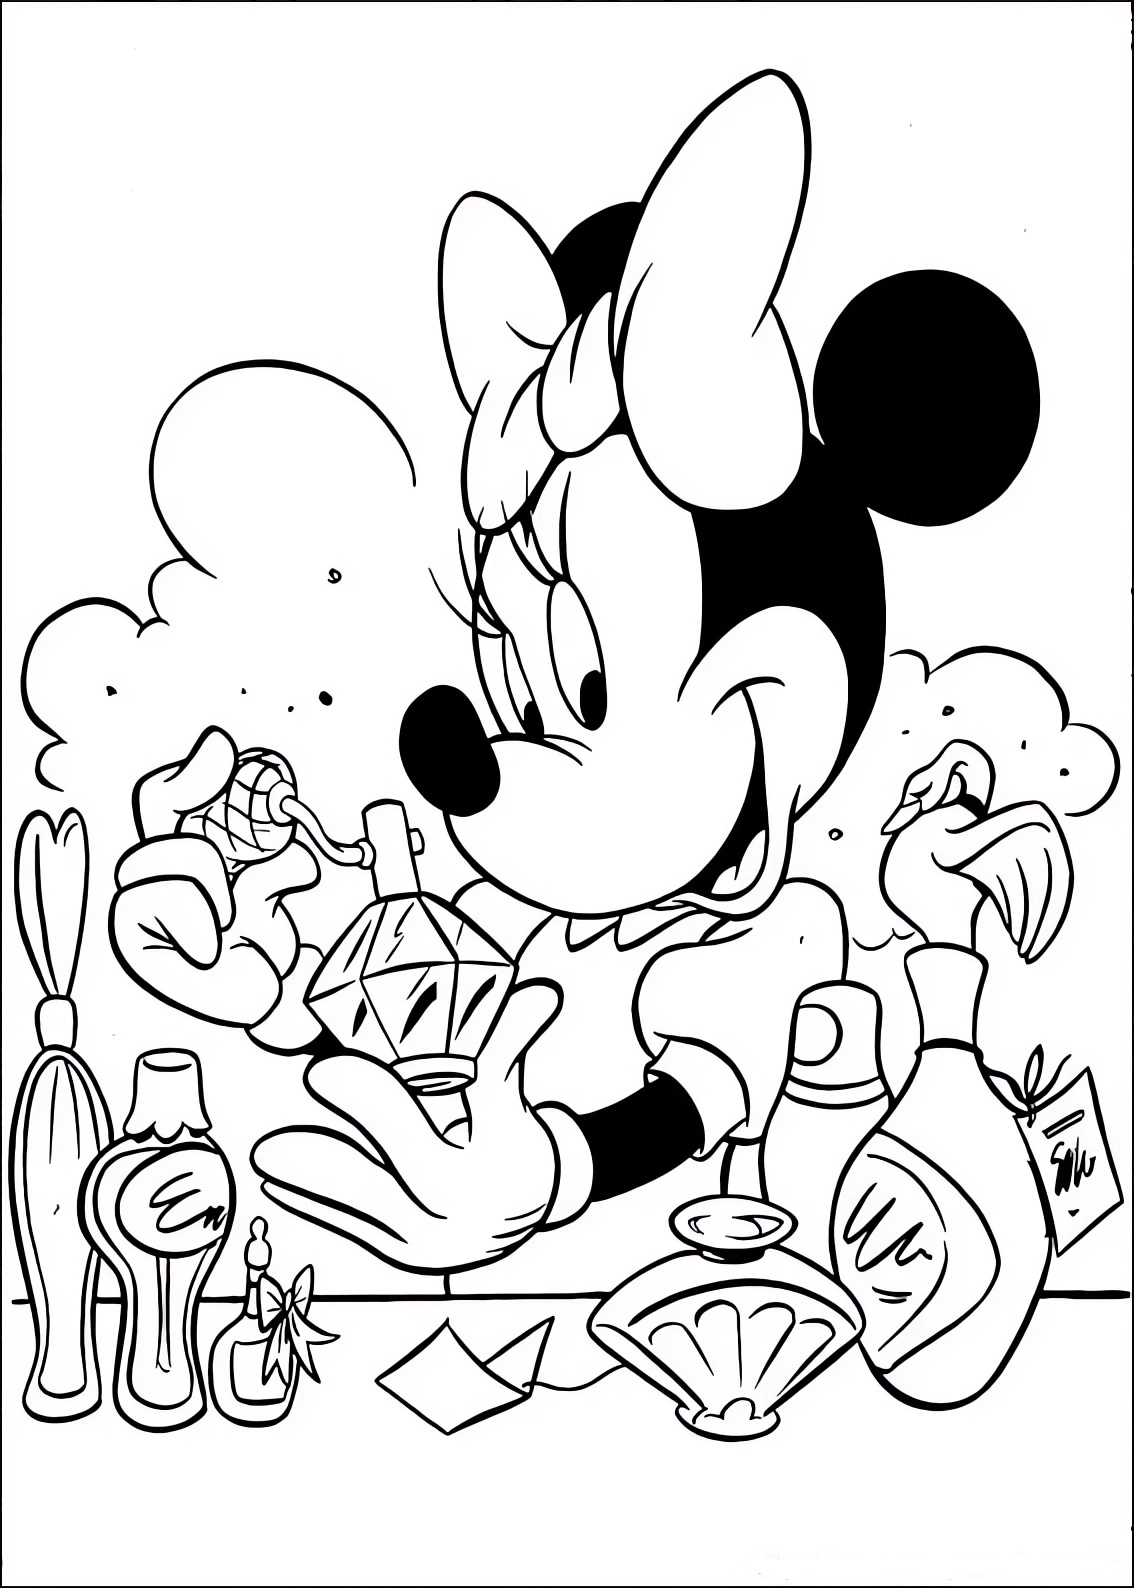 Coloring page of Minnie choosing perfumes